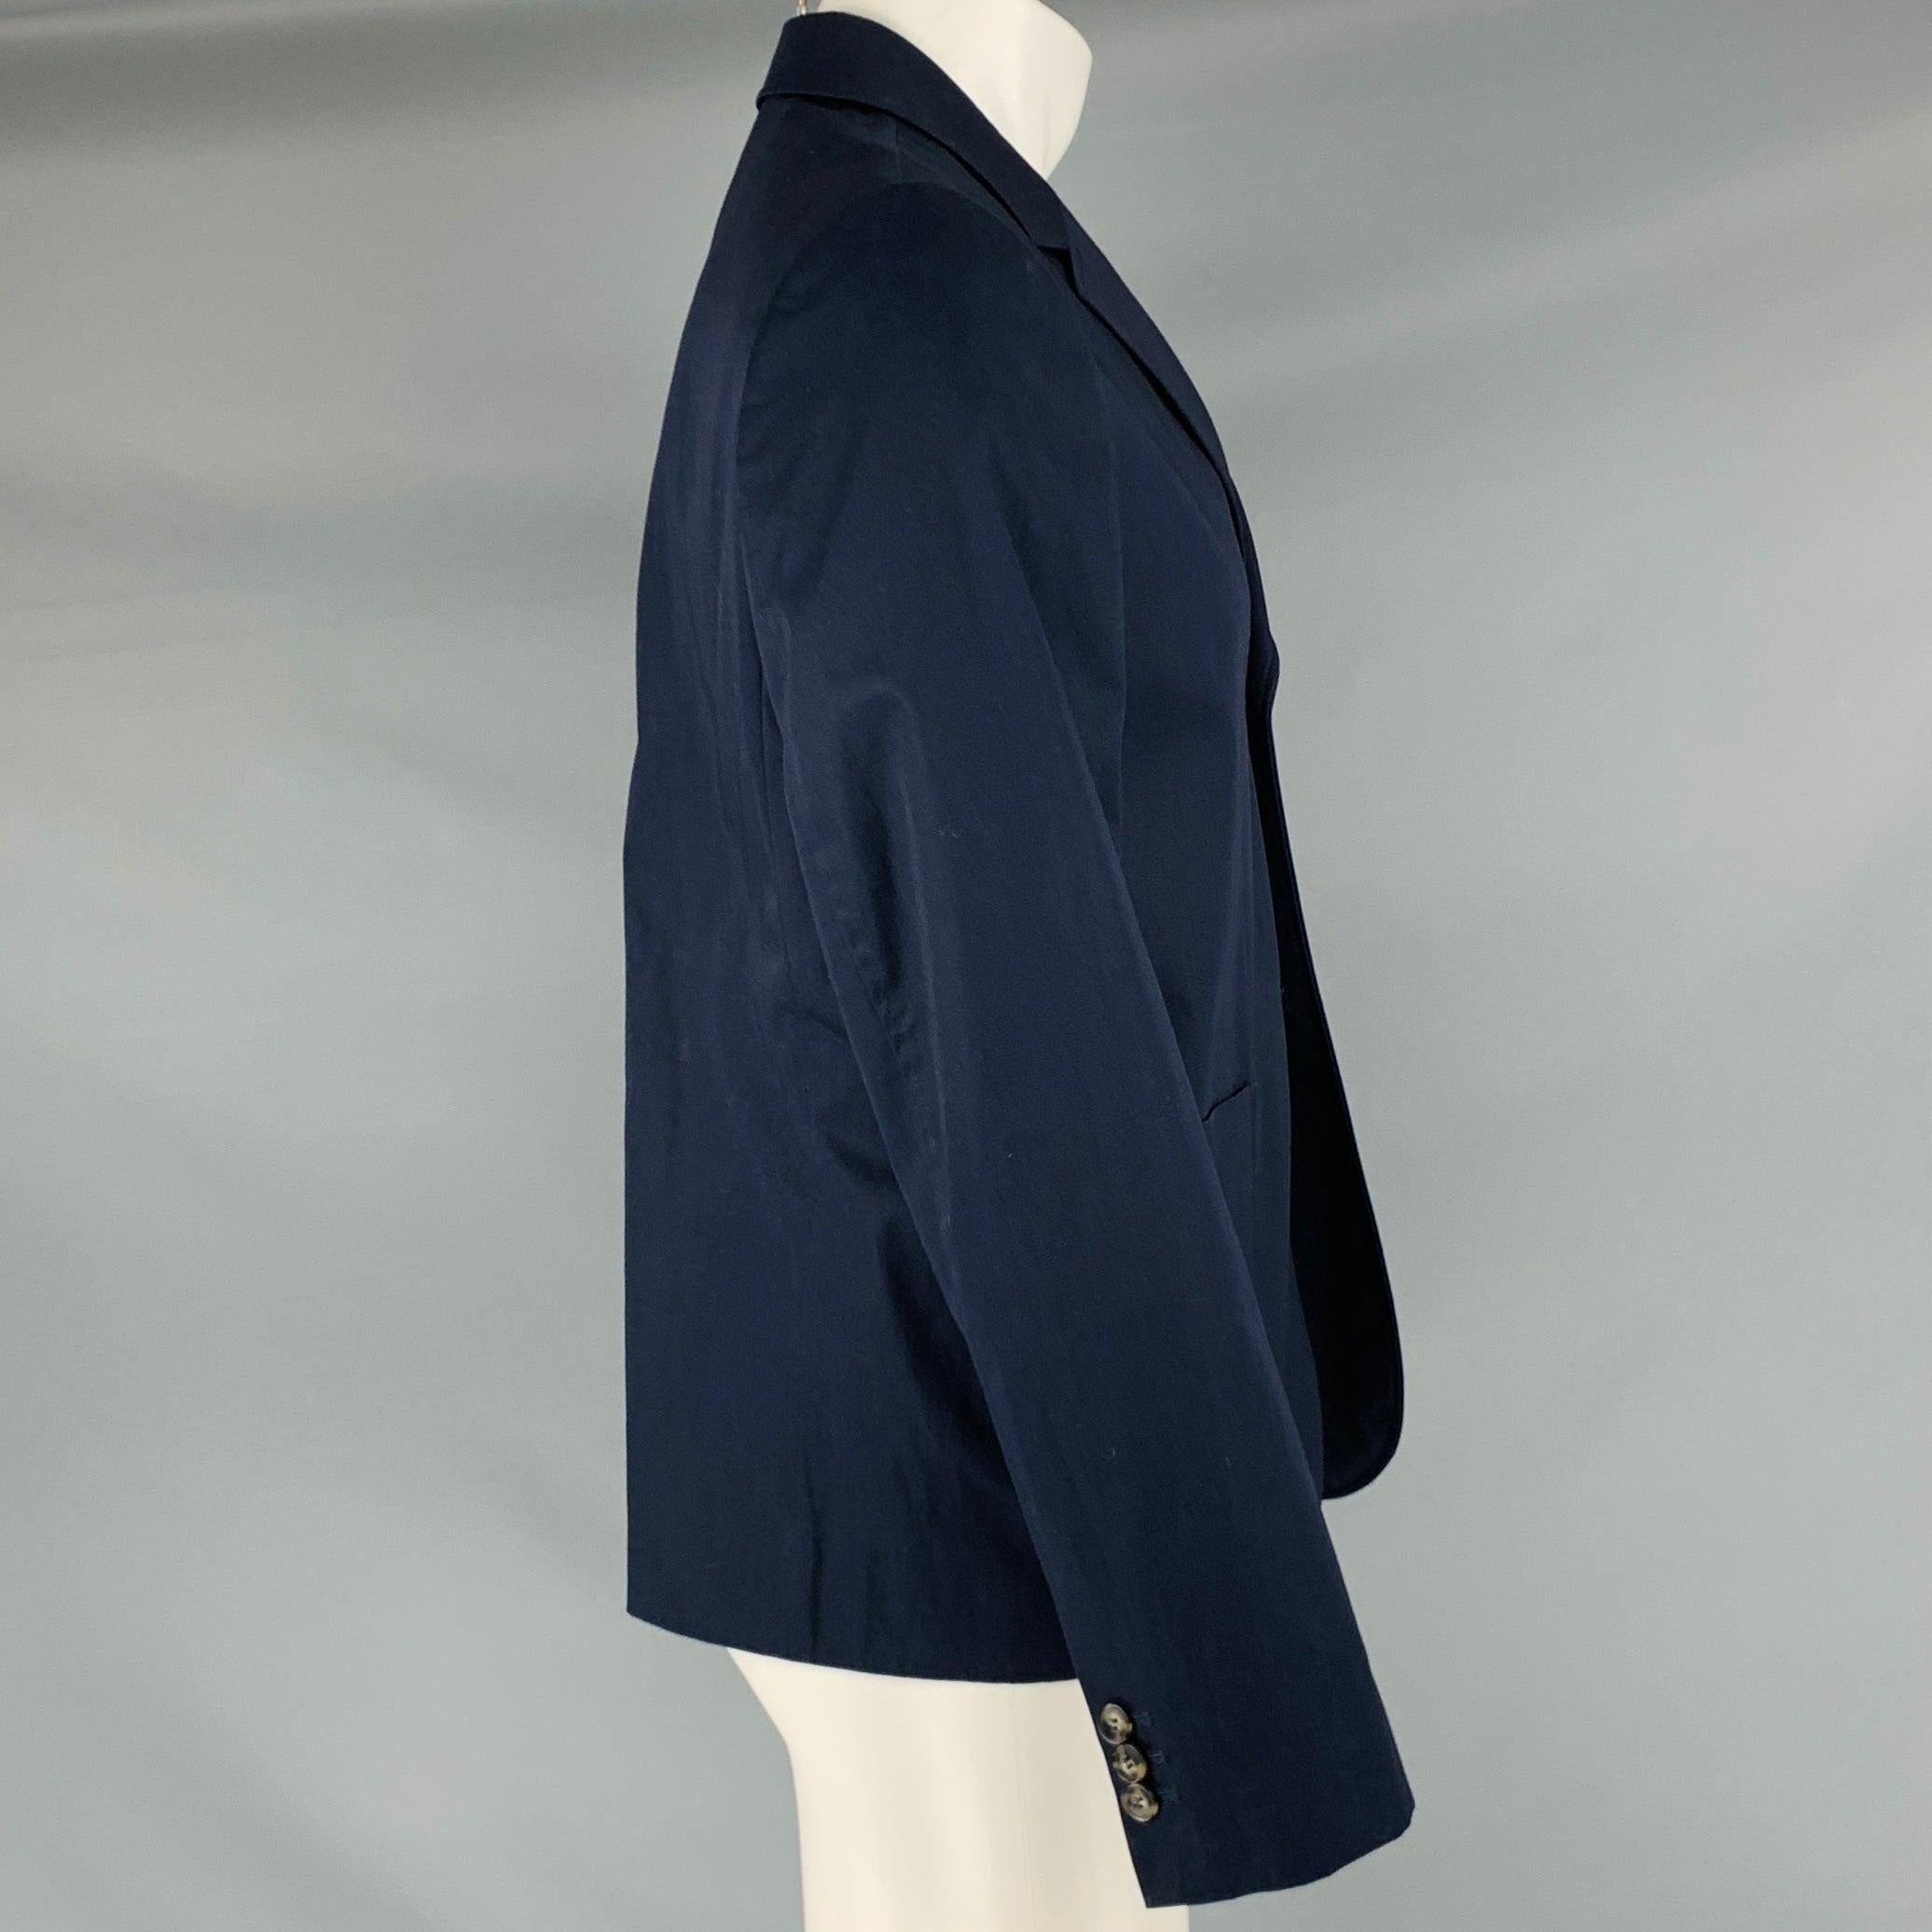 CARVEN jacket
in a
navy cotton fabric featuring a single-breasted style, notch lapel, and double button closure. Made in Hungary.Excellent Pre-Owned Condition. 

Marked:   50 

Measurements: 
 
Shoulder: 18 inches Chest: 40 inches Sleeve: 26 inches